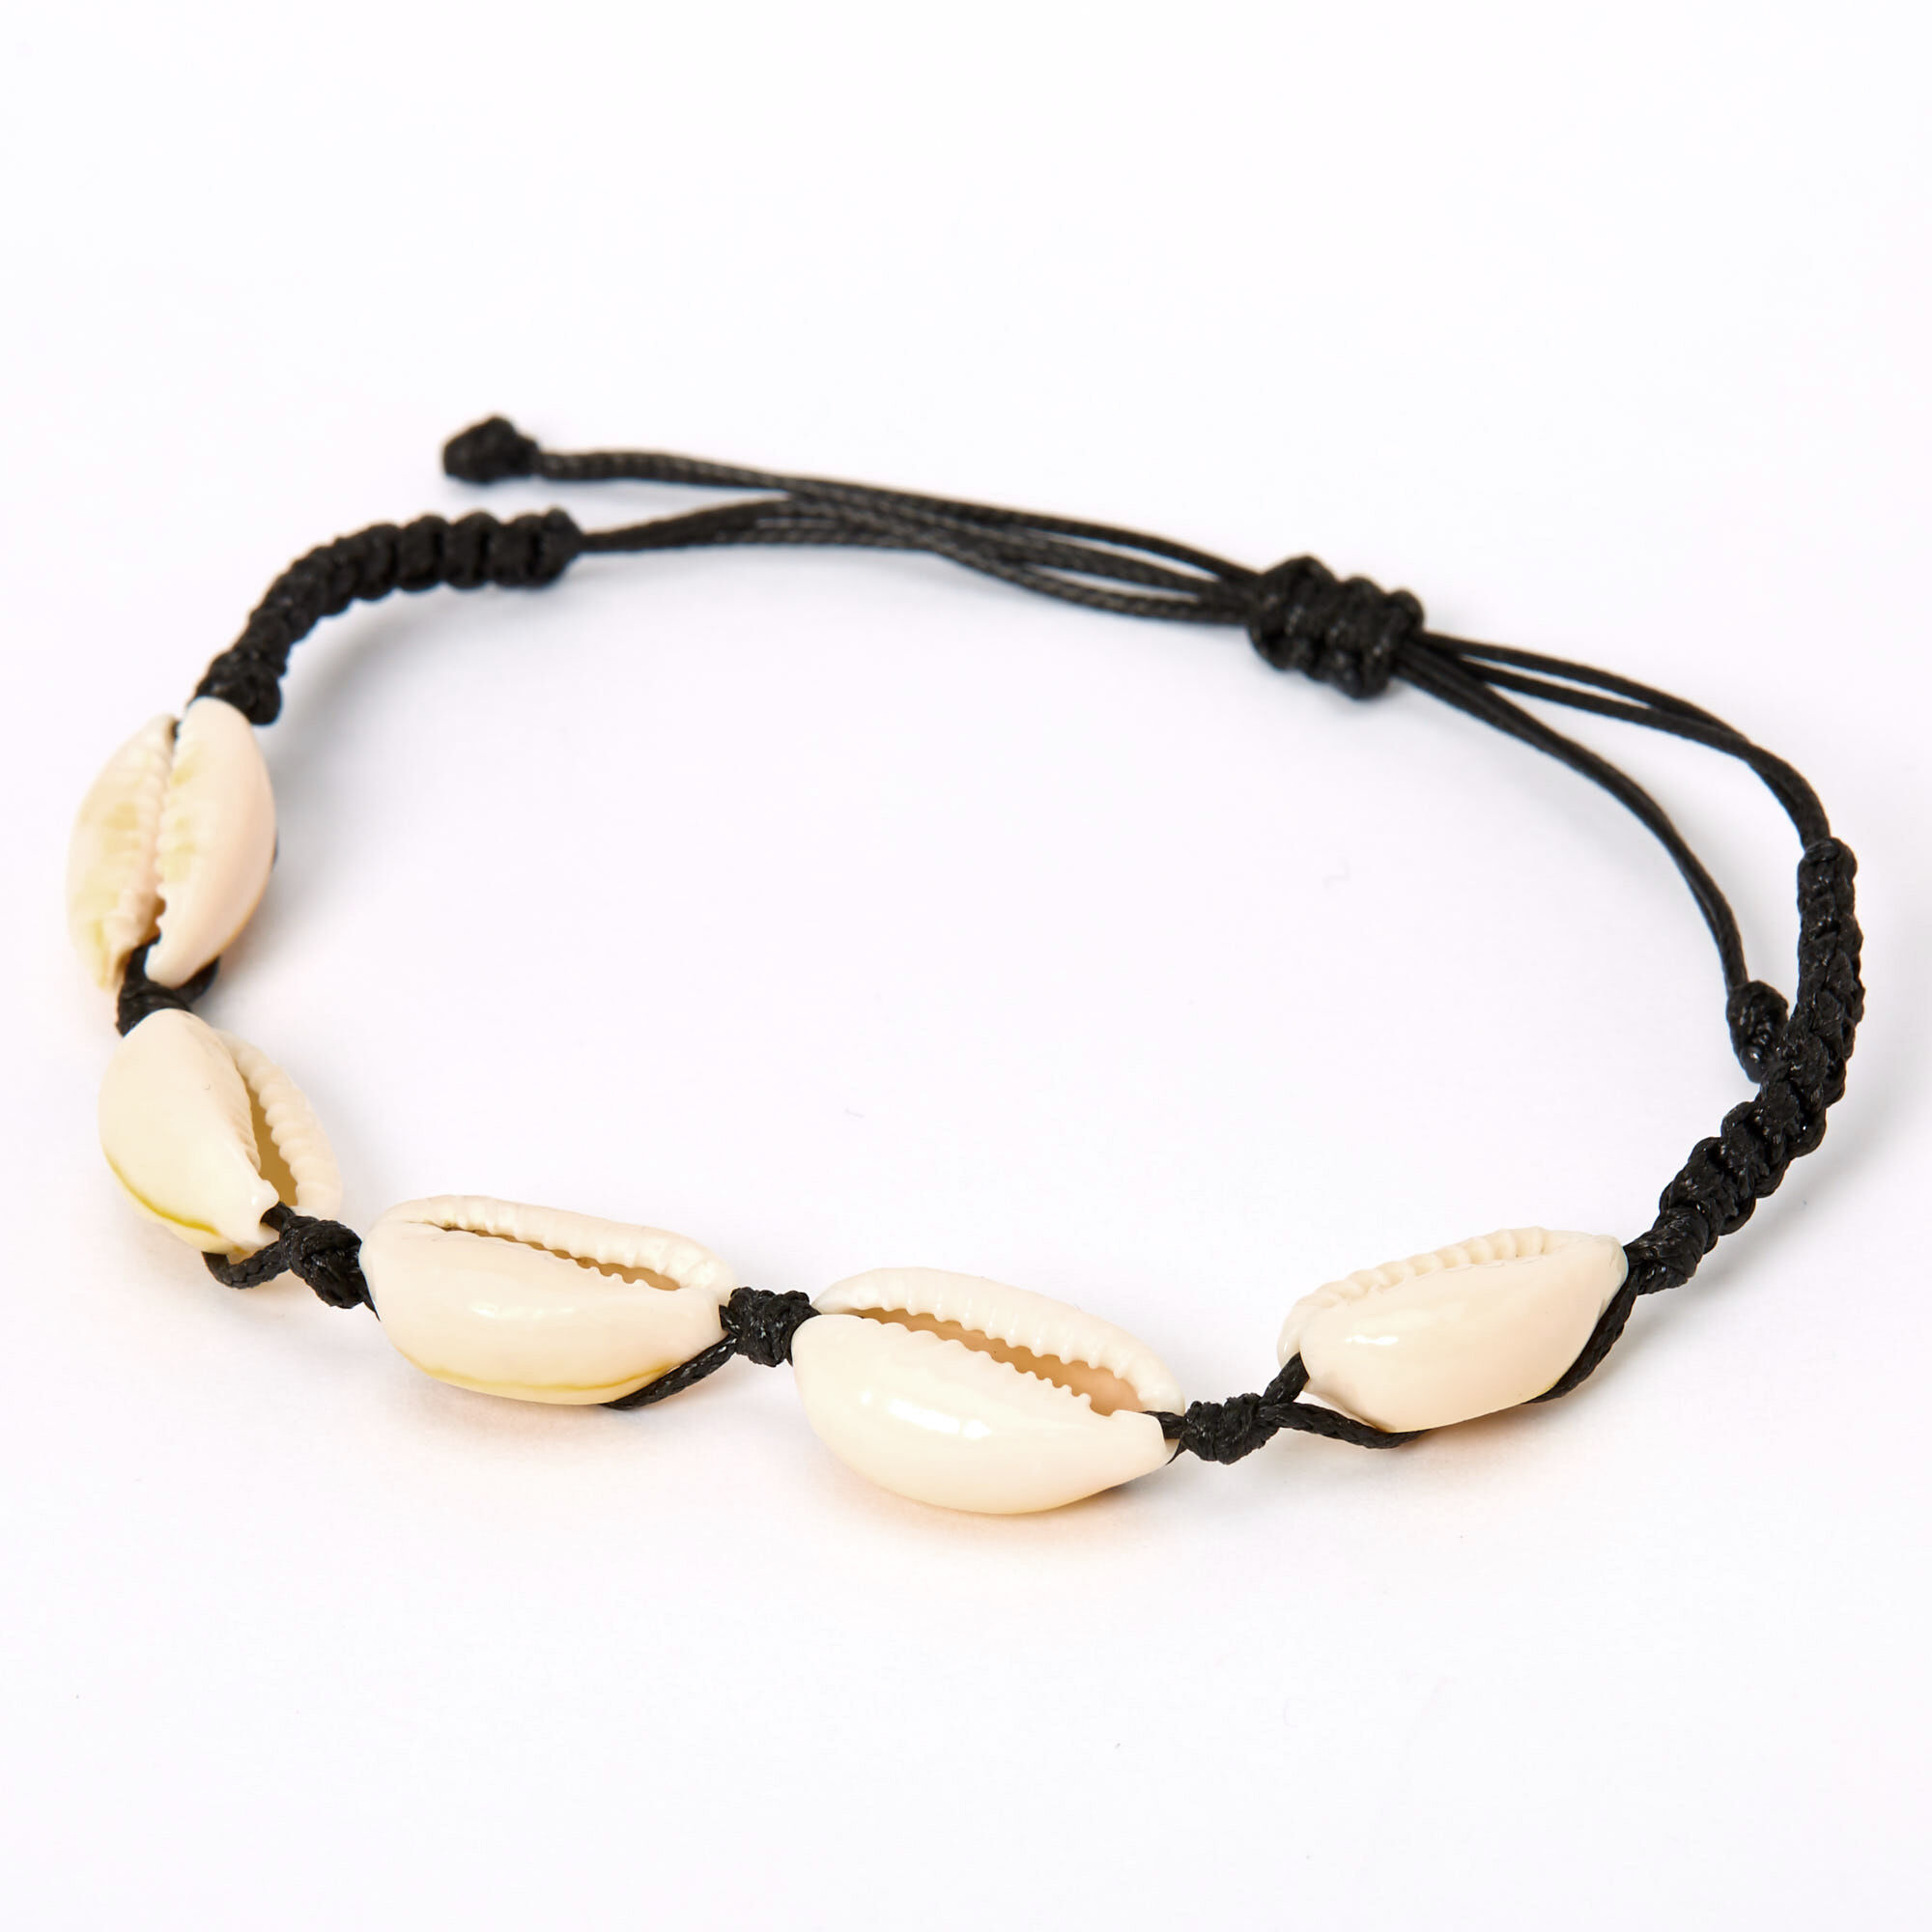 Buy Layered Real Cowrie Shell Bracelet on Double Chain in Sterling Silver,  Gold or Rose Gold by Seasidemotifs Online in India - Etsy